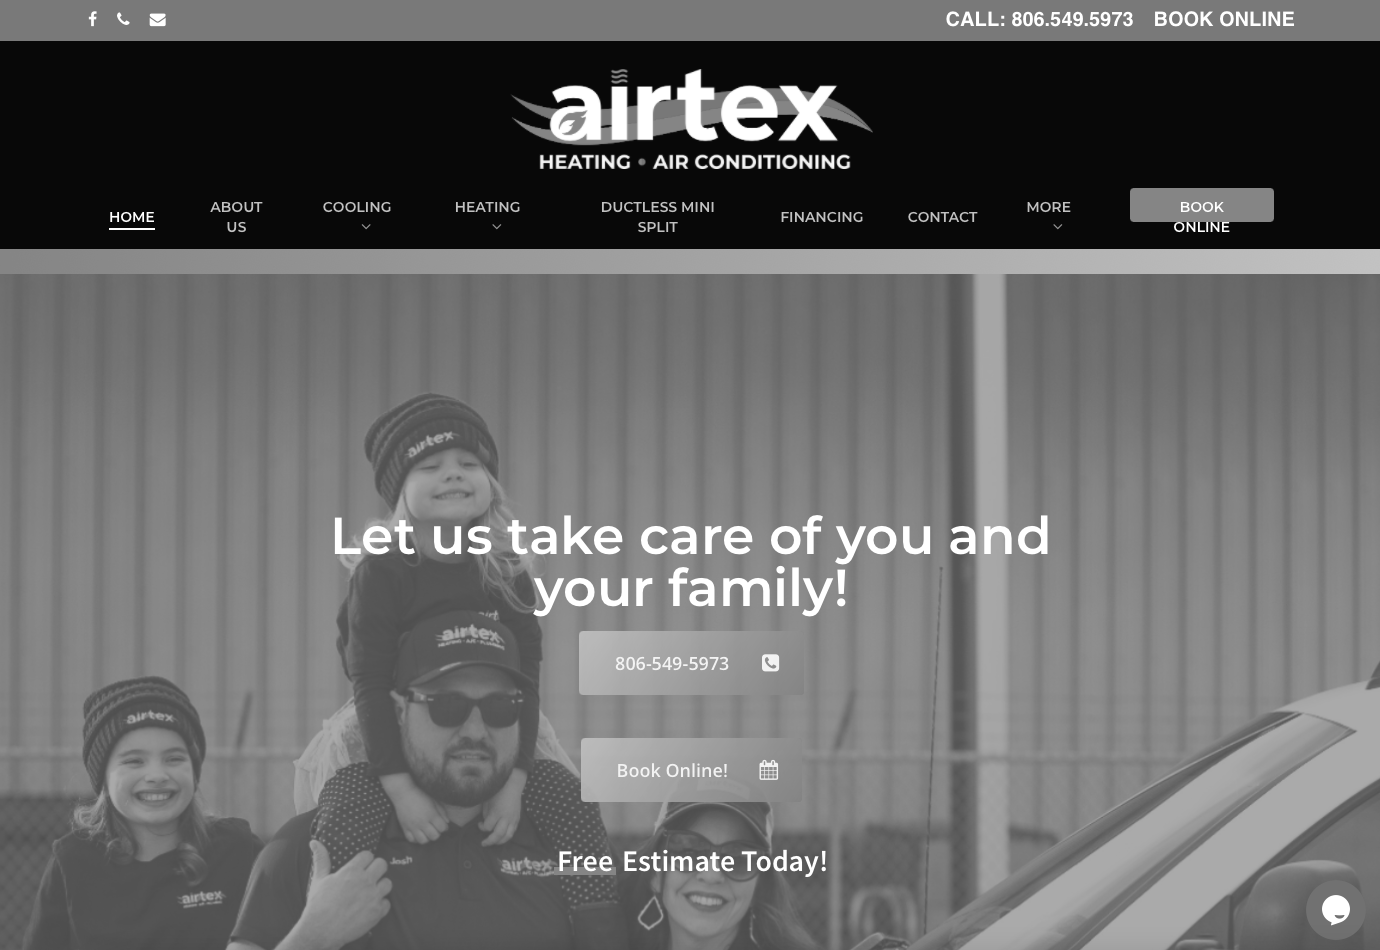 Airtex Heating and Air Conditioning Website Design